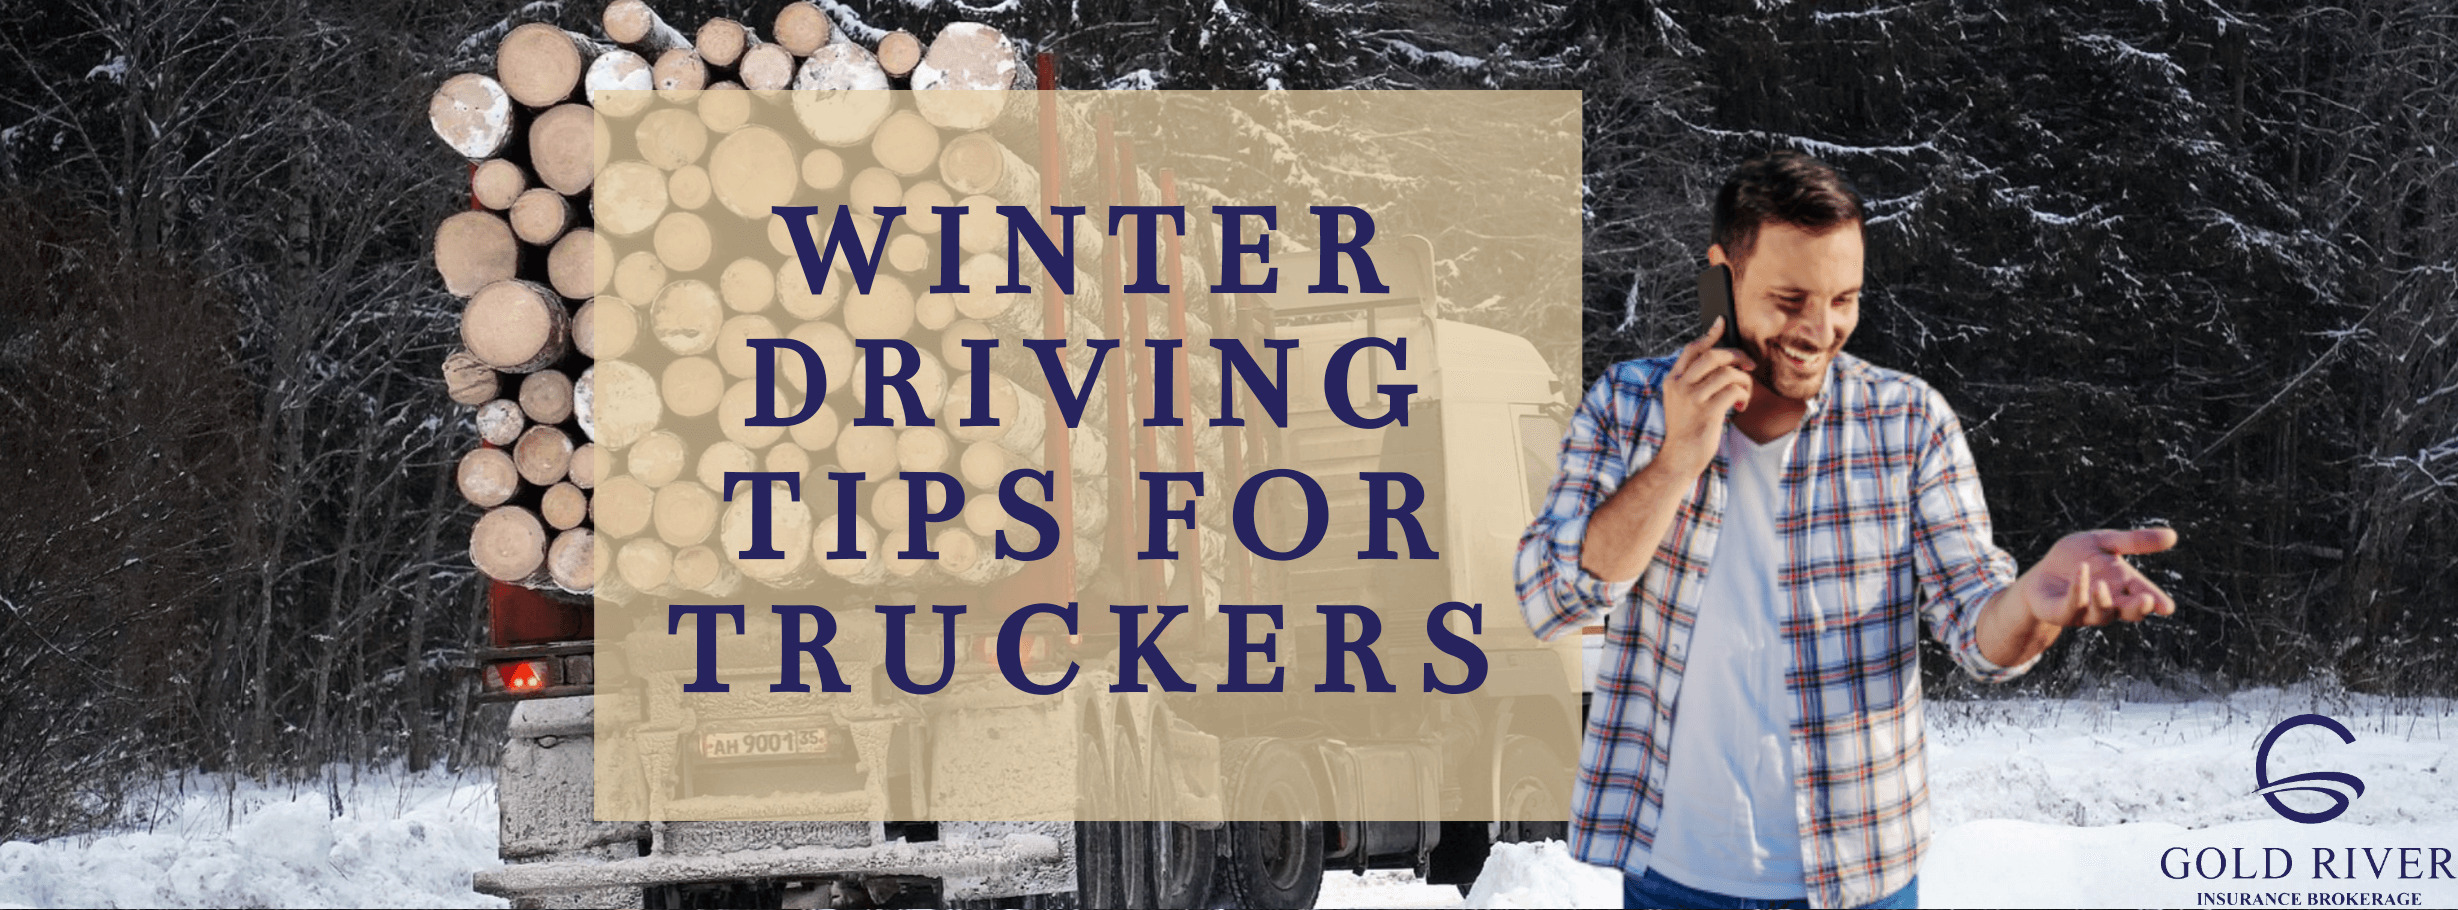 Commercial-Truck-Insurance-Winter-Driving-Safety-Blog-Graphic